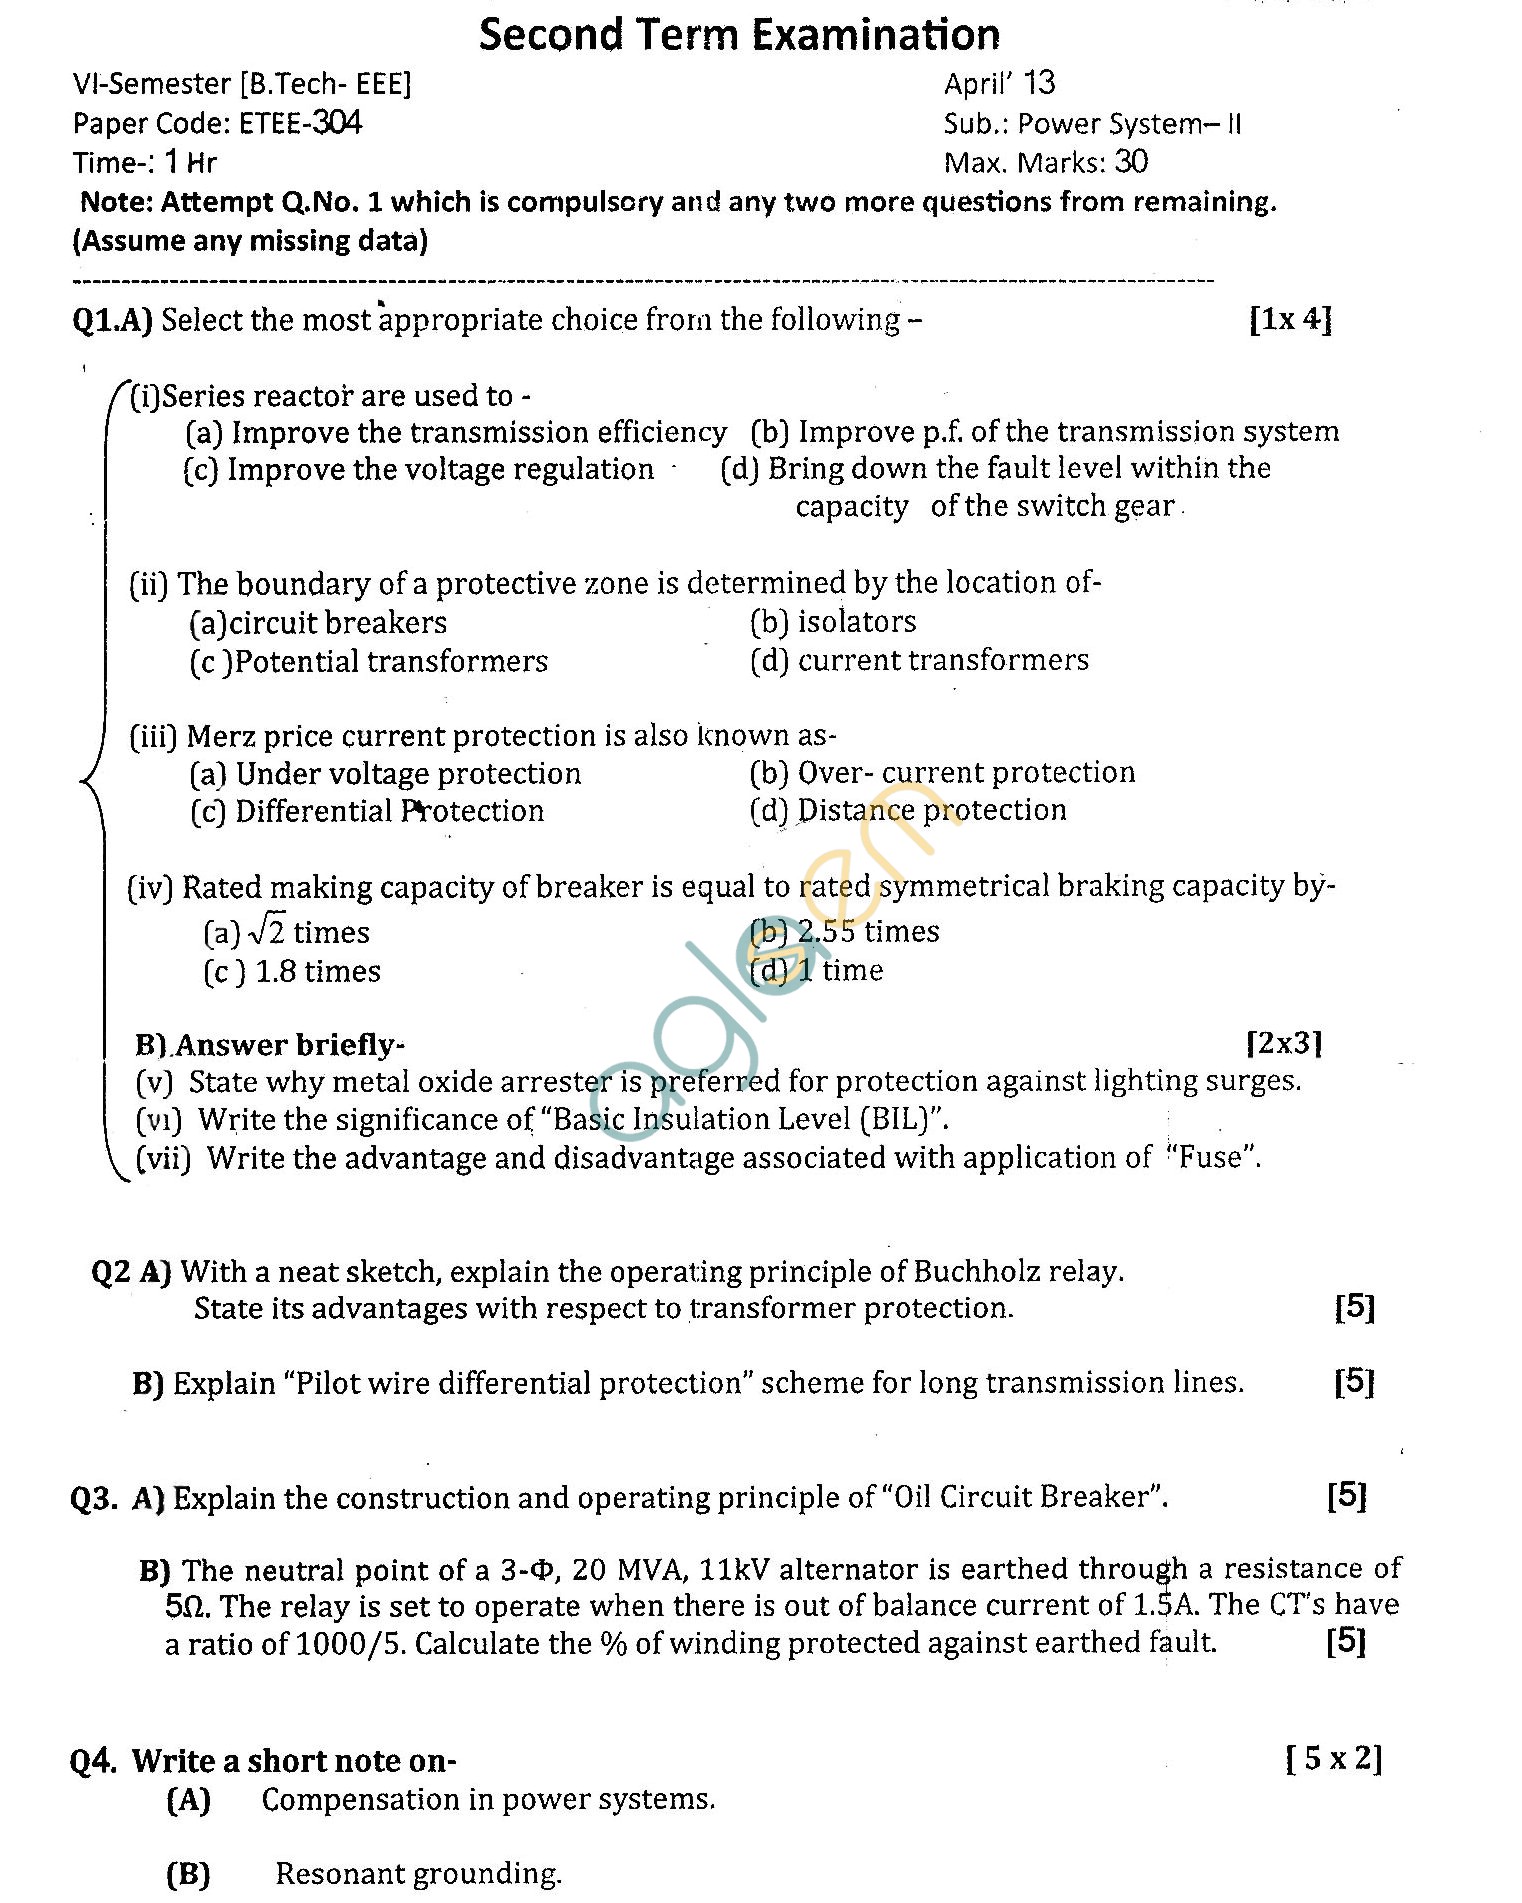 GGSIPU Question Papers Sixth Semester – Second Term 2013 – ETEE-304